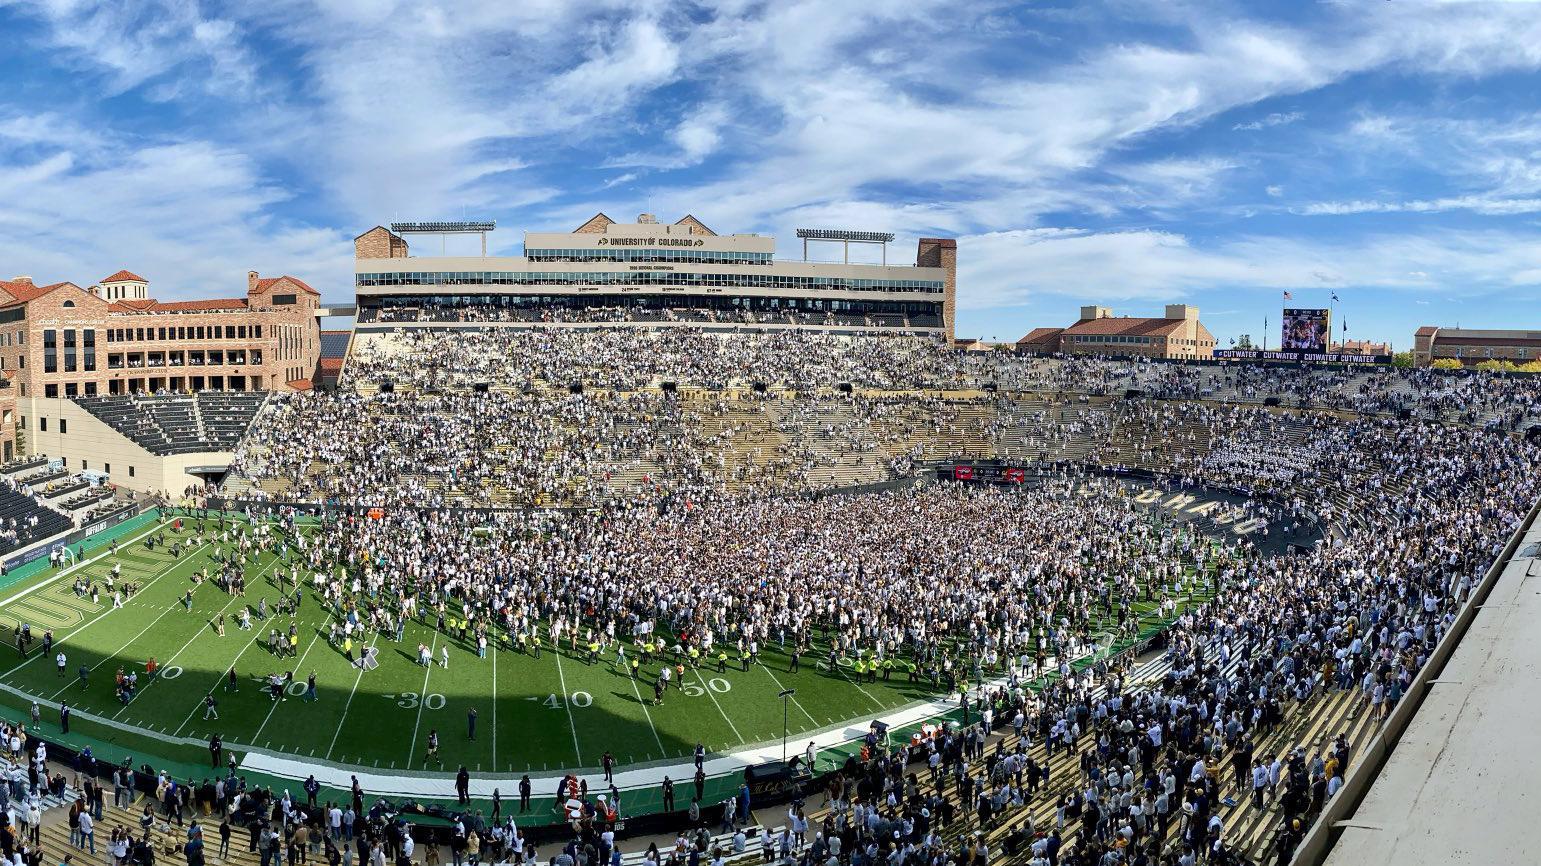 Colorado fans storm field after their first win of season Watch ESPN